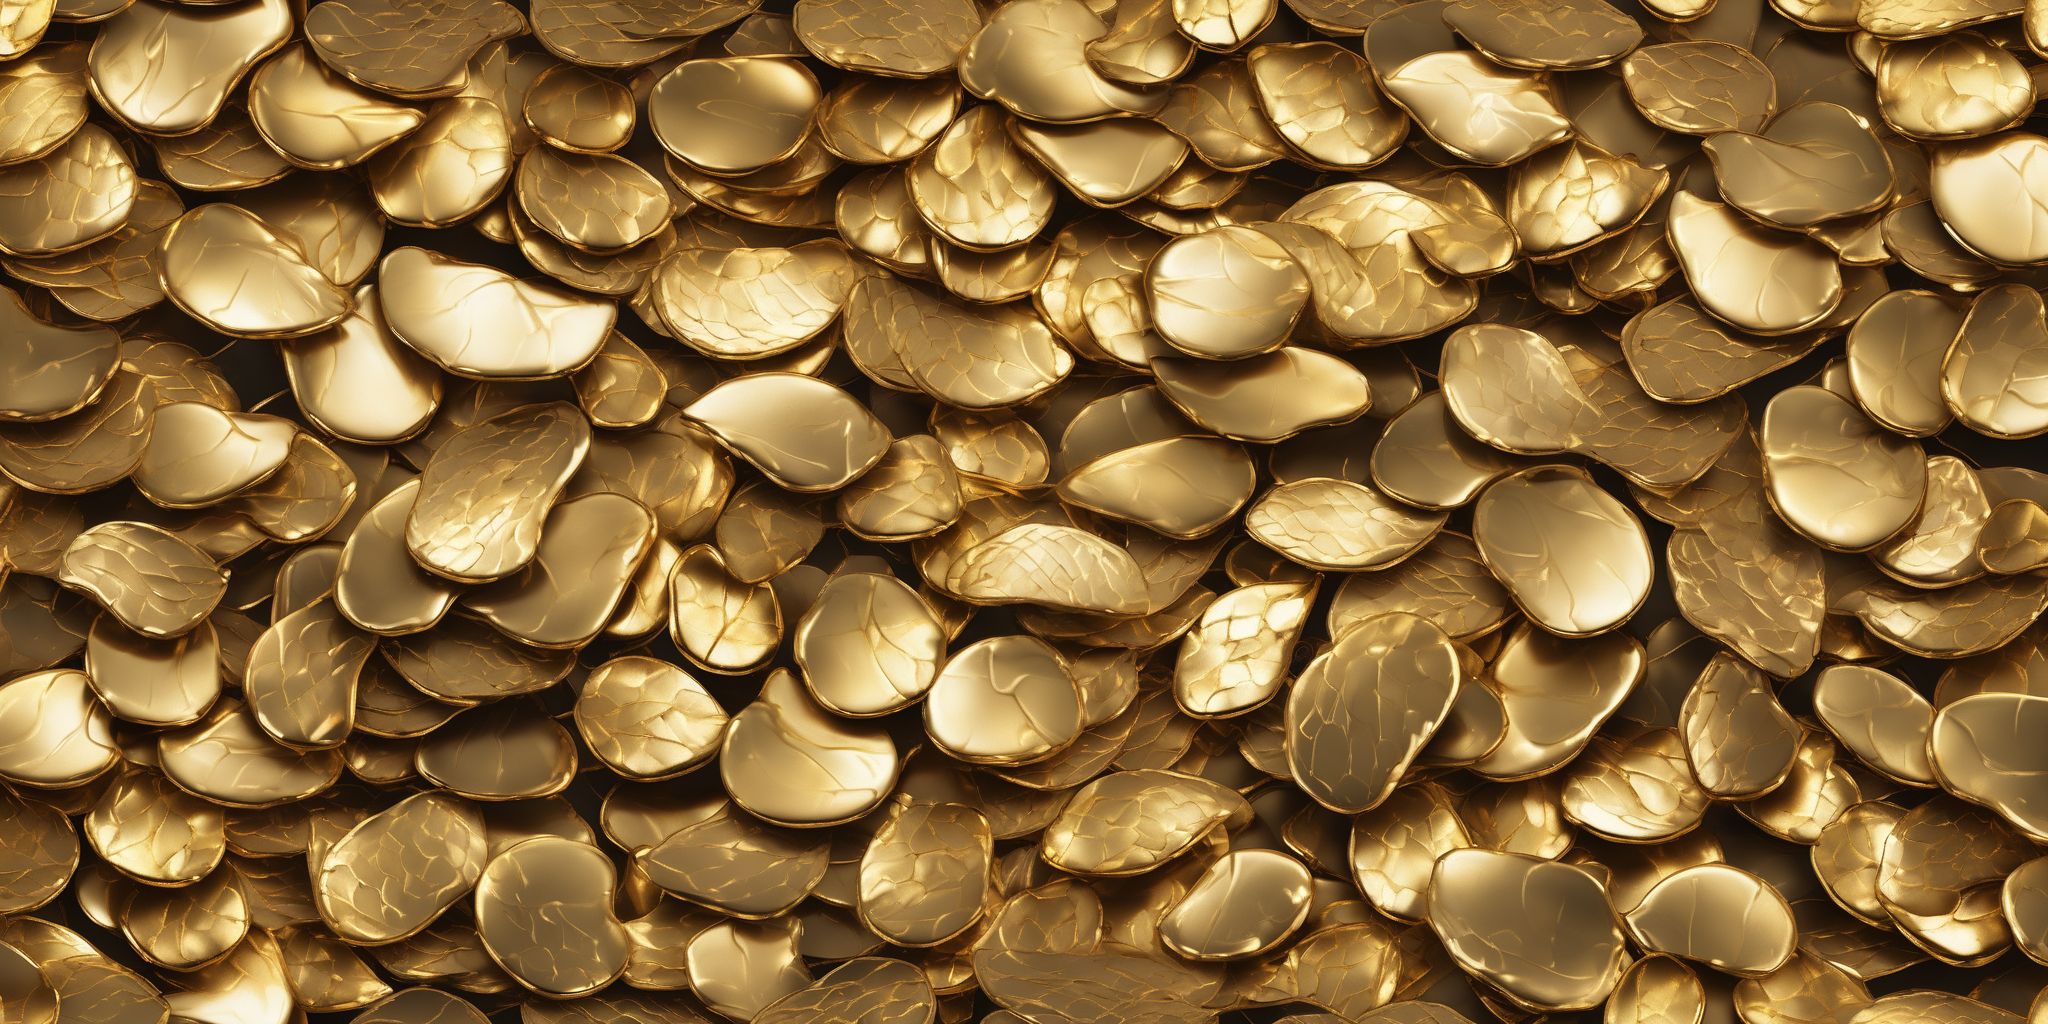 Golden scales  in realistic, photographic style